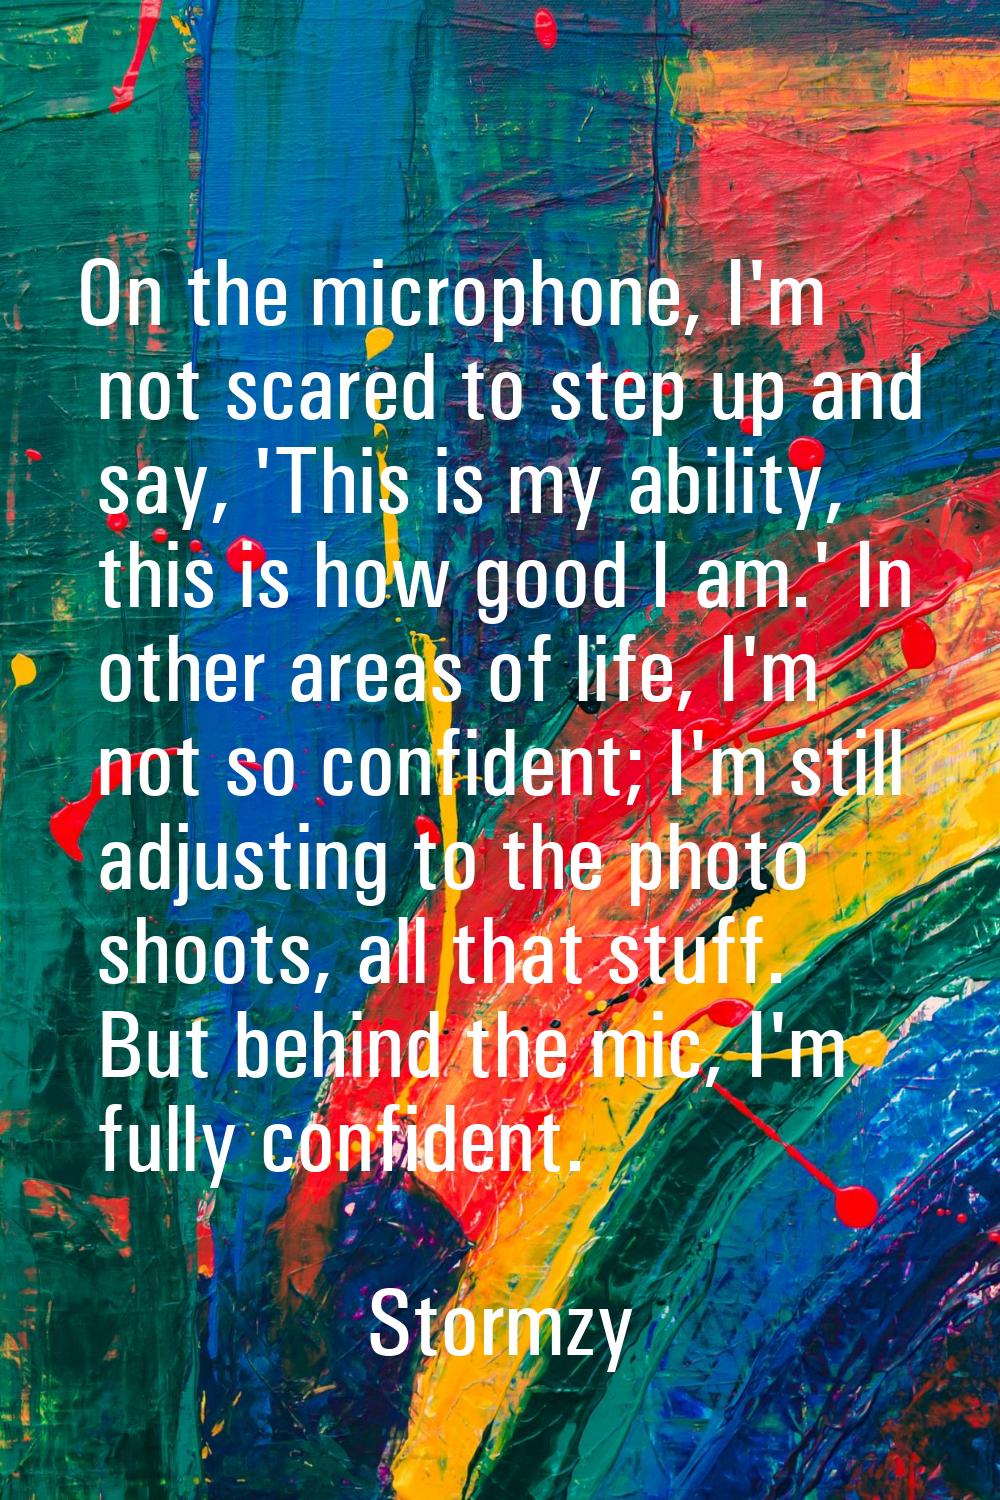 On the microphone, I'm not scared to step up and say, 'This is my ability, this is how good I am.' 